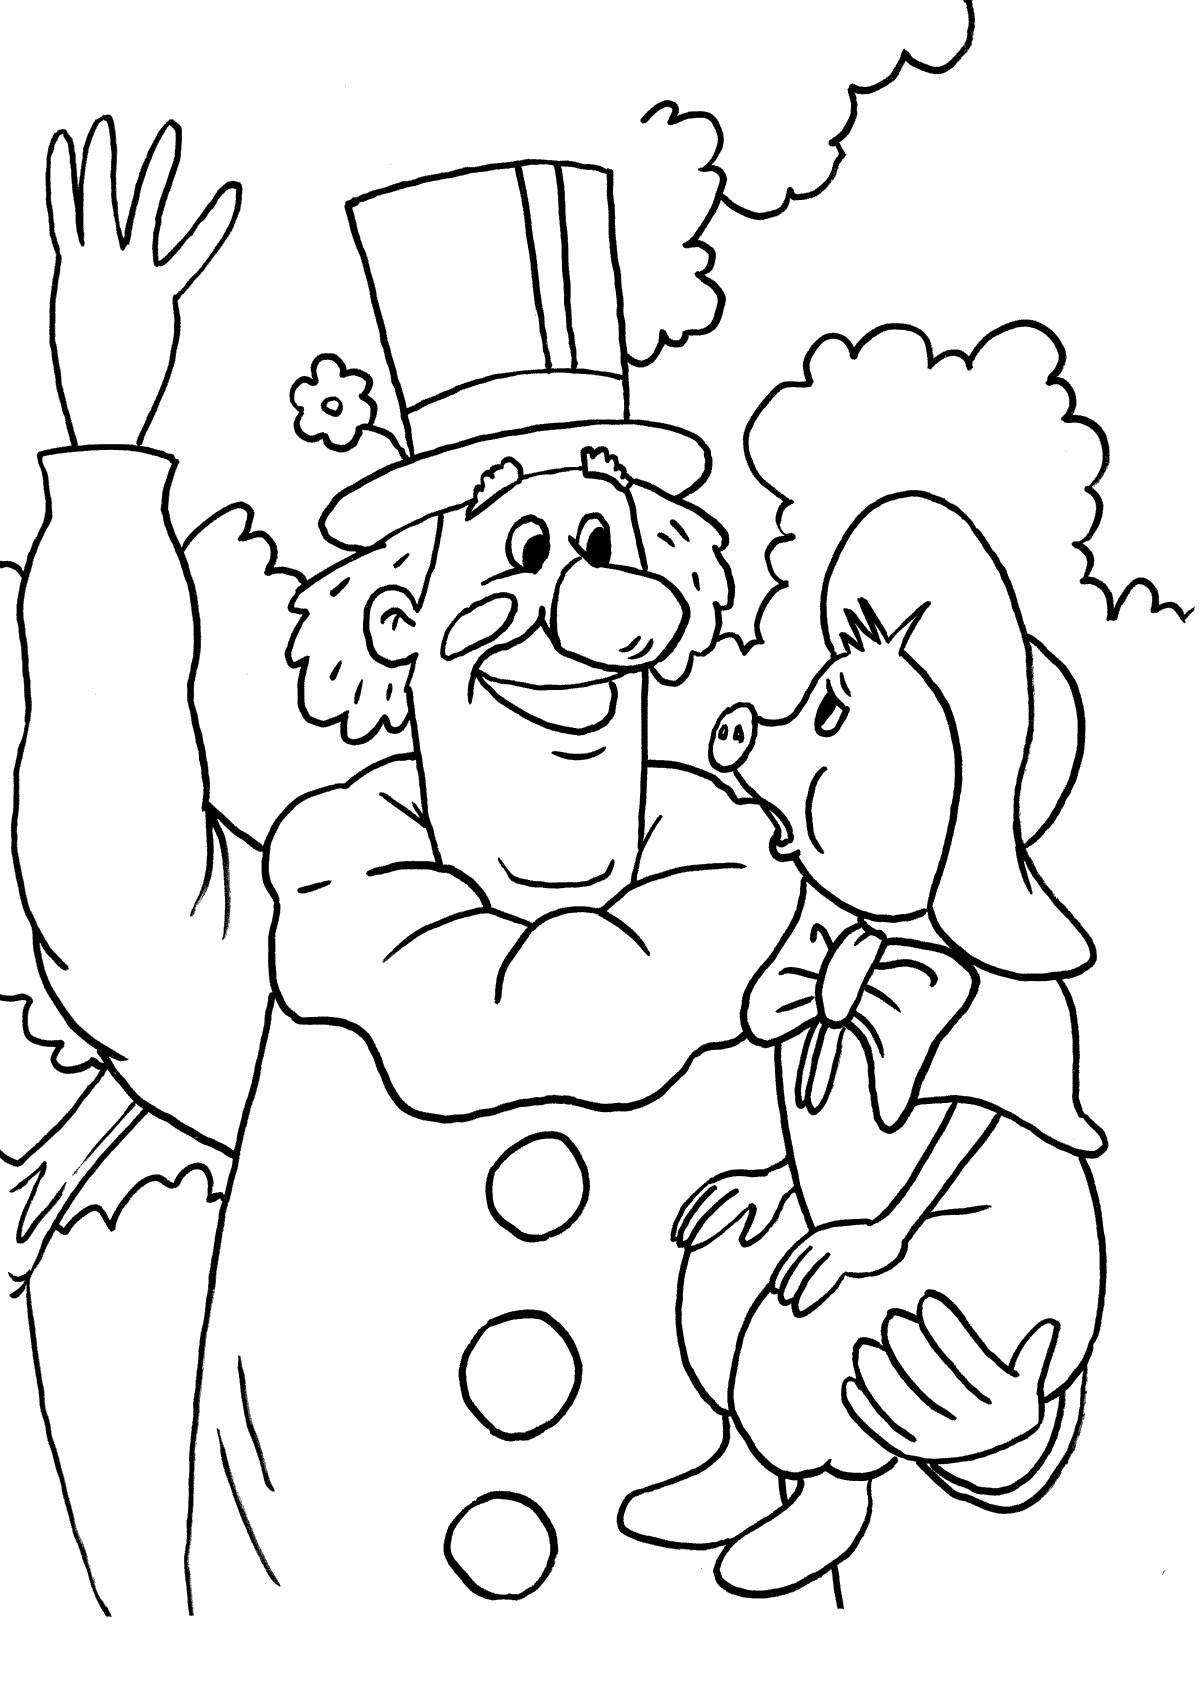 Clown with a pig